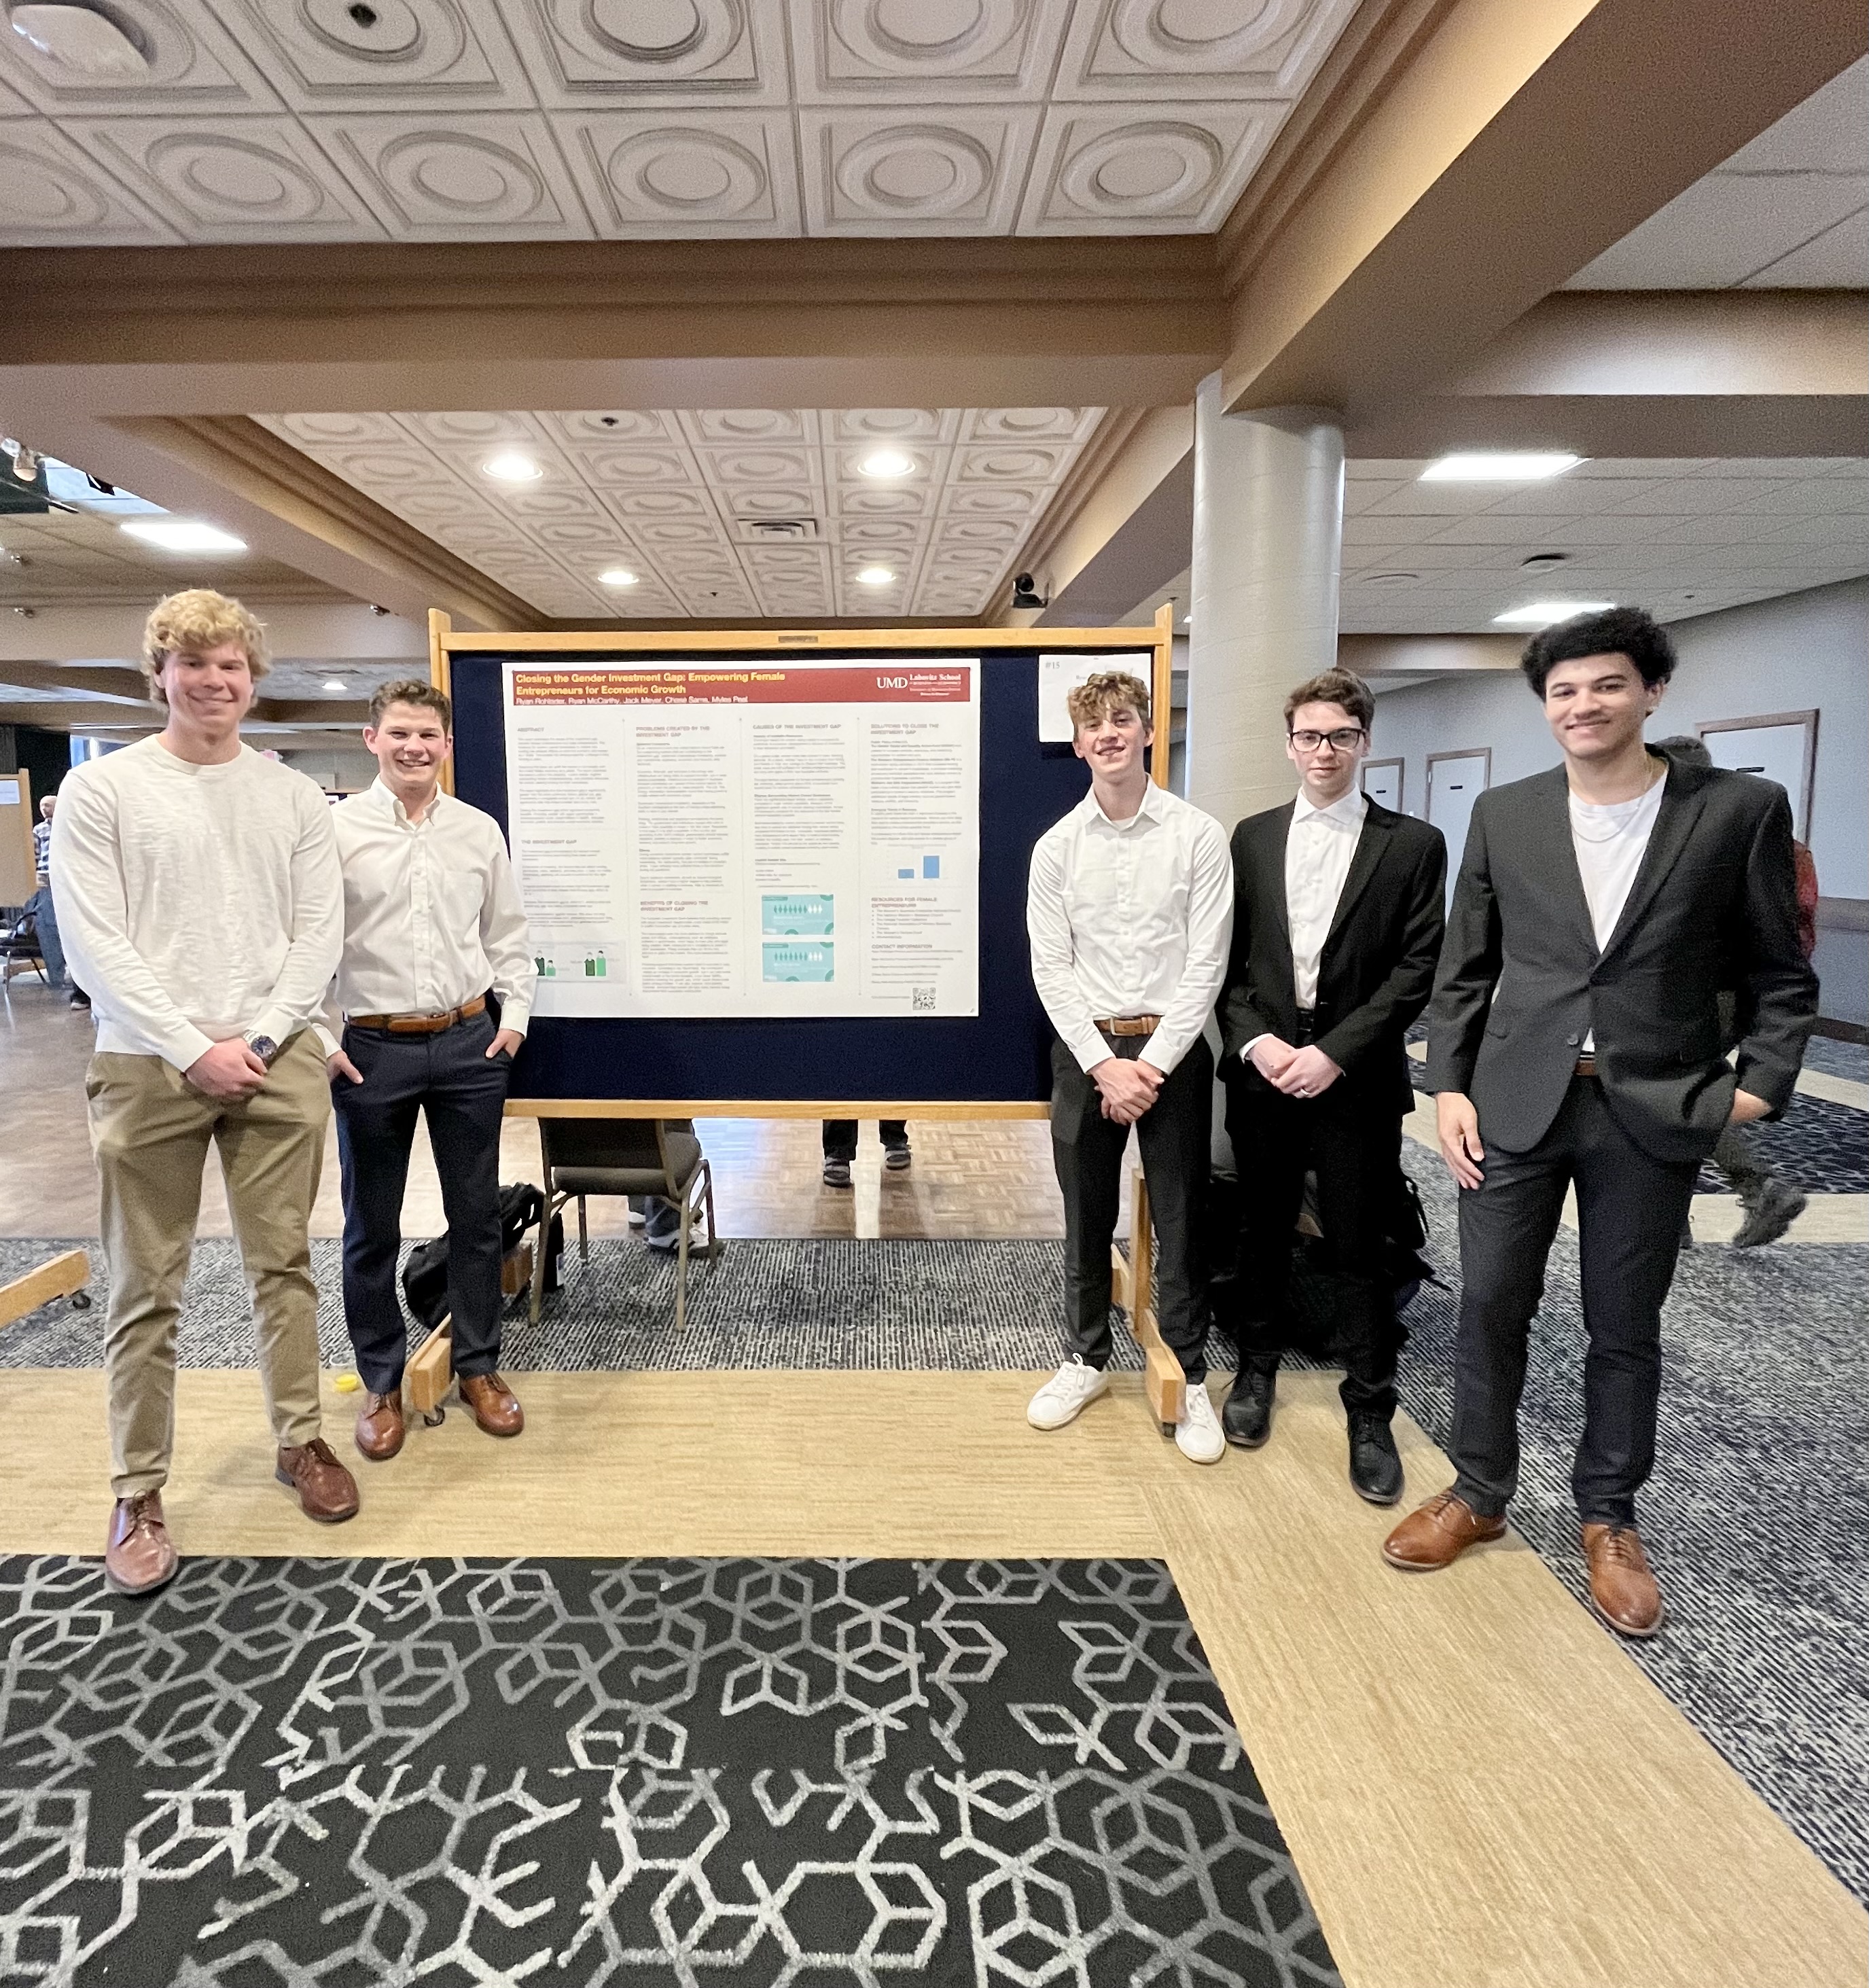 The five men who presented their research in front of their poster board 